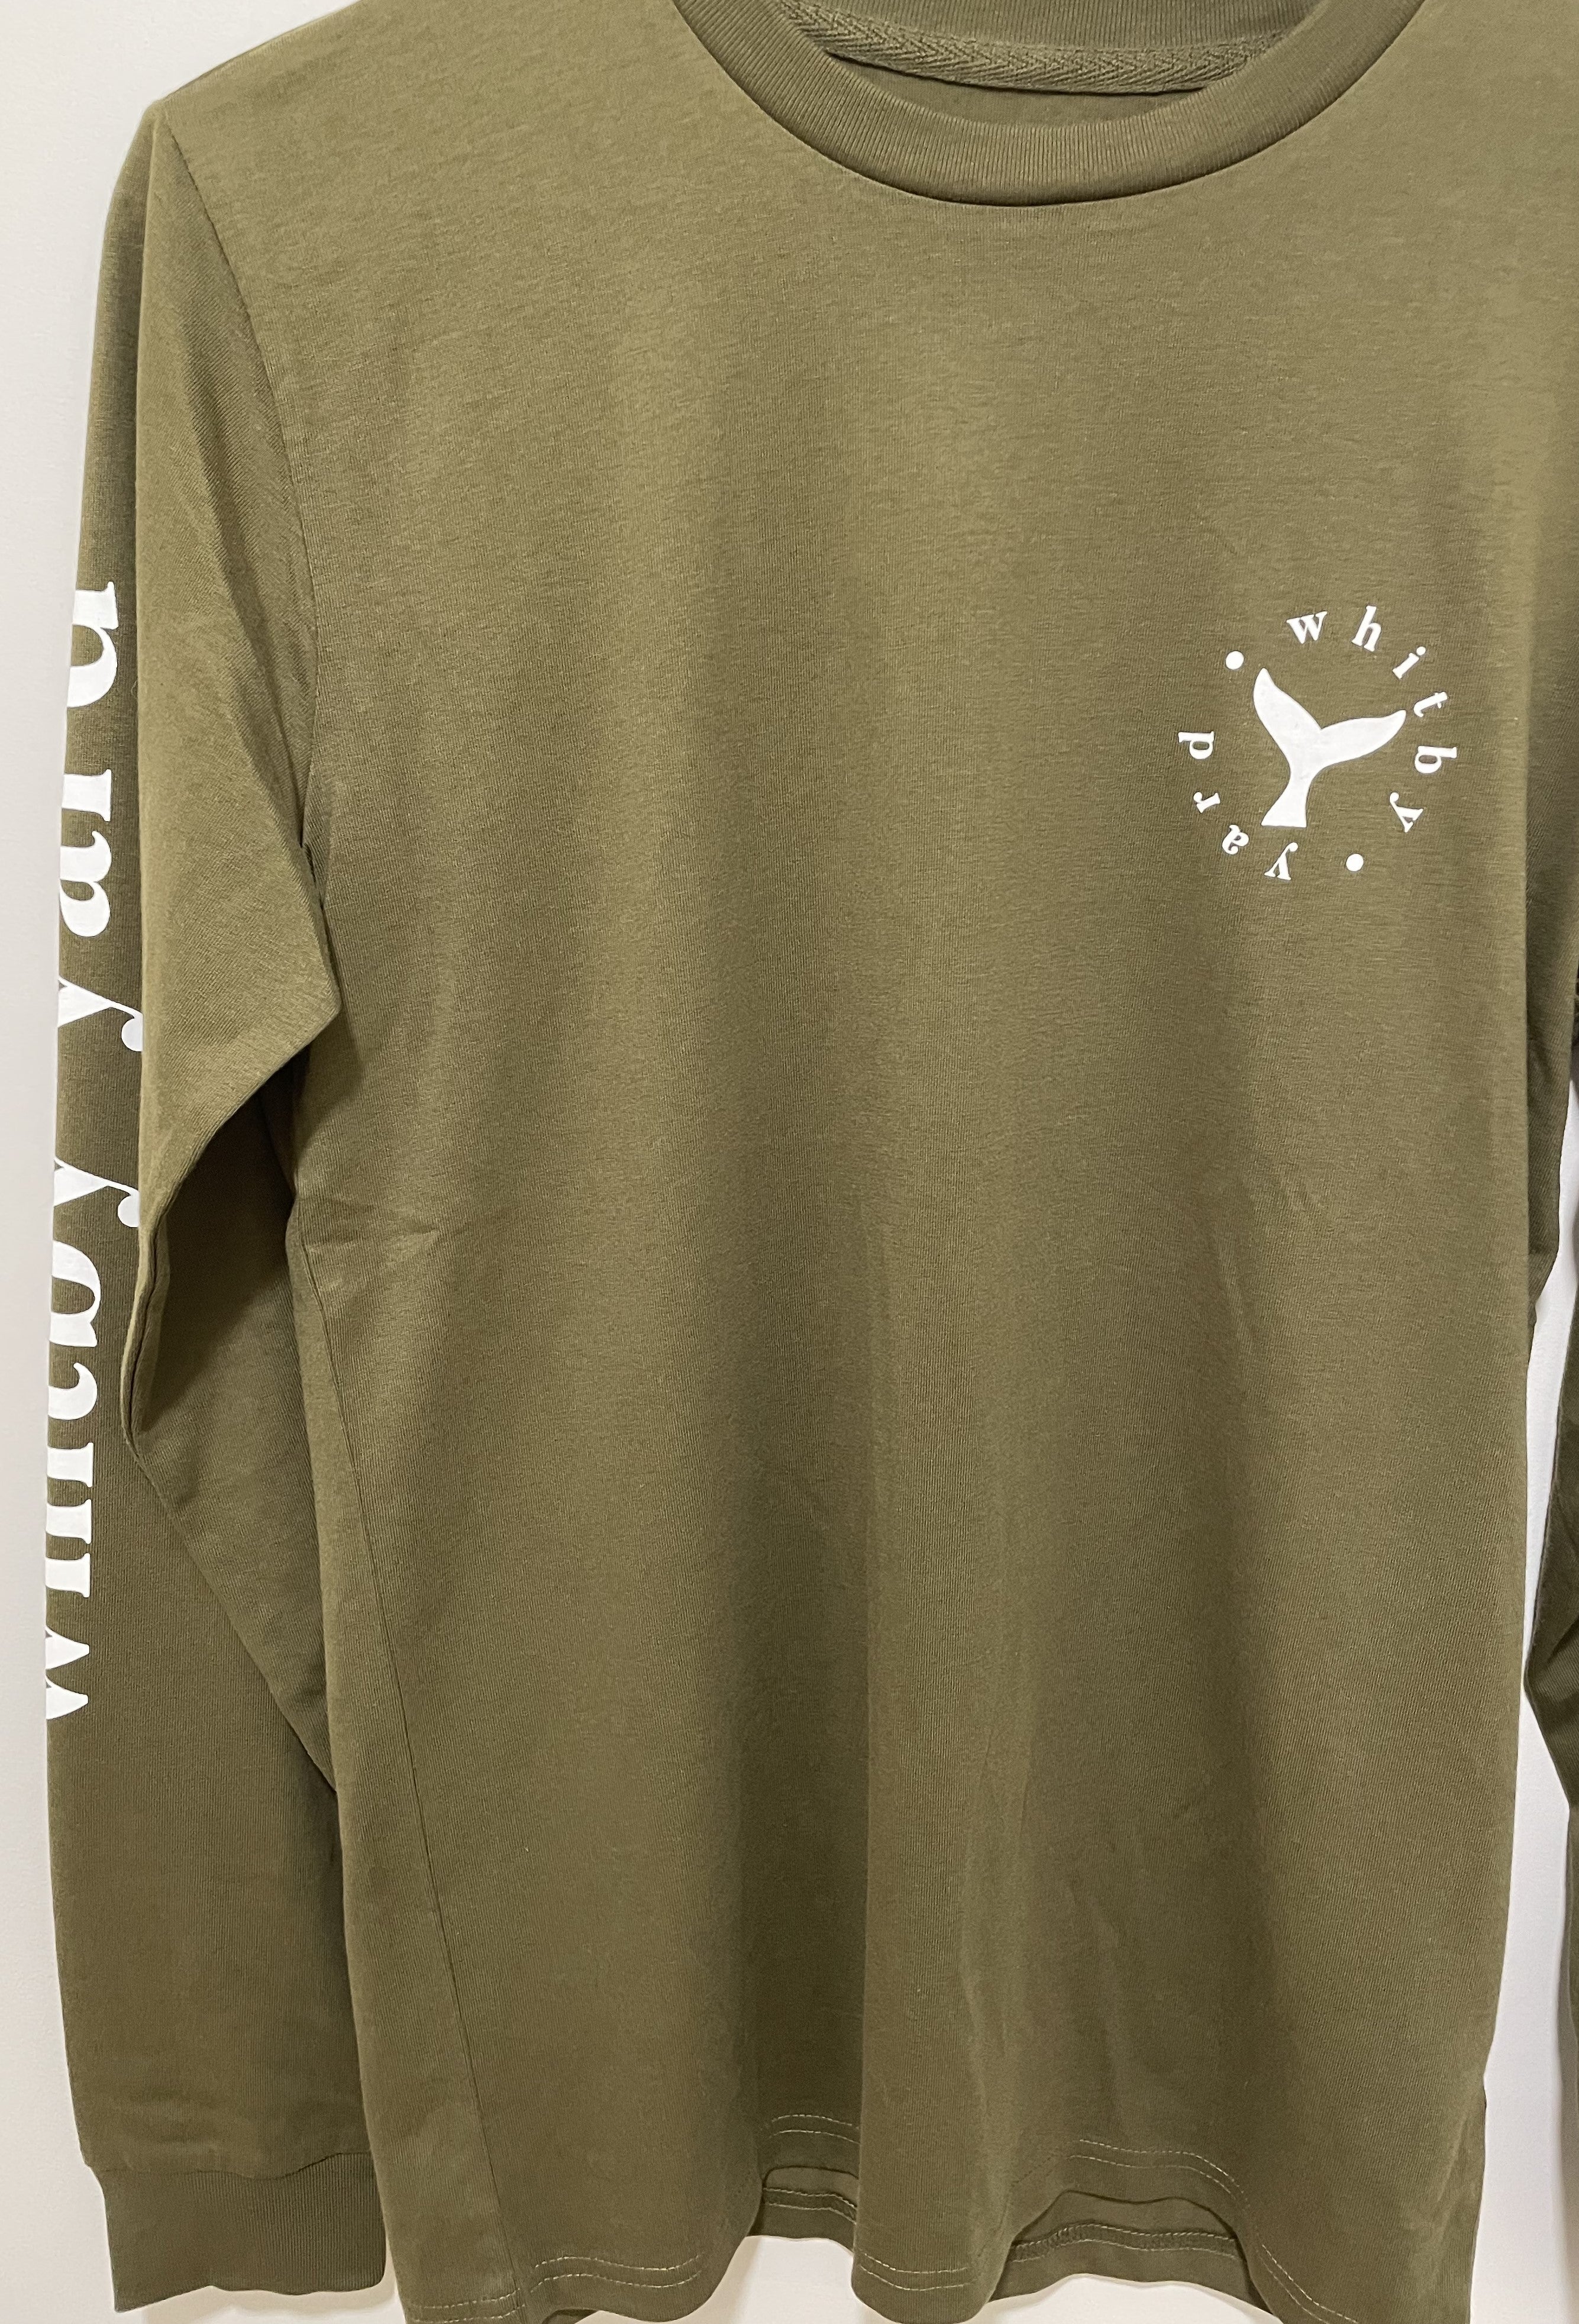 Unisex long sleeved T shirt in Khaki with Whitby Yard on the sleeve